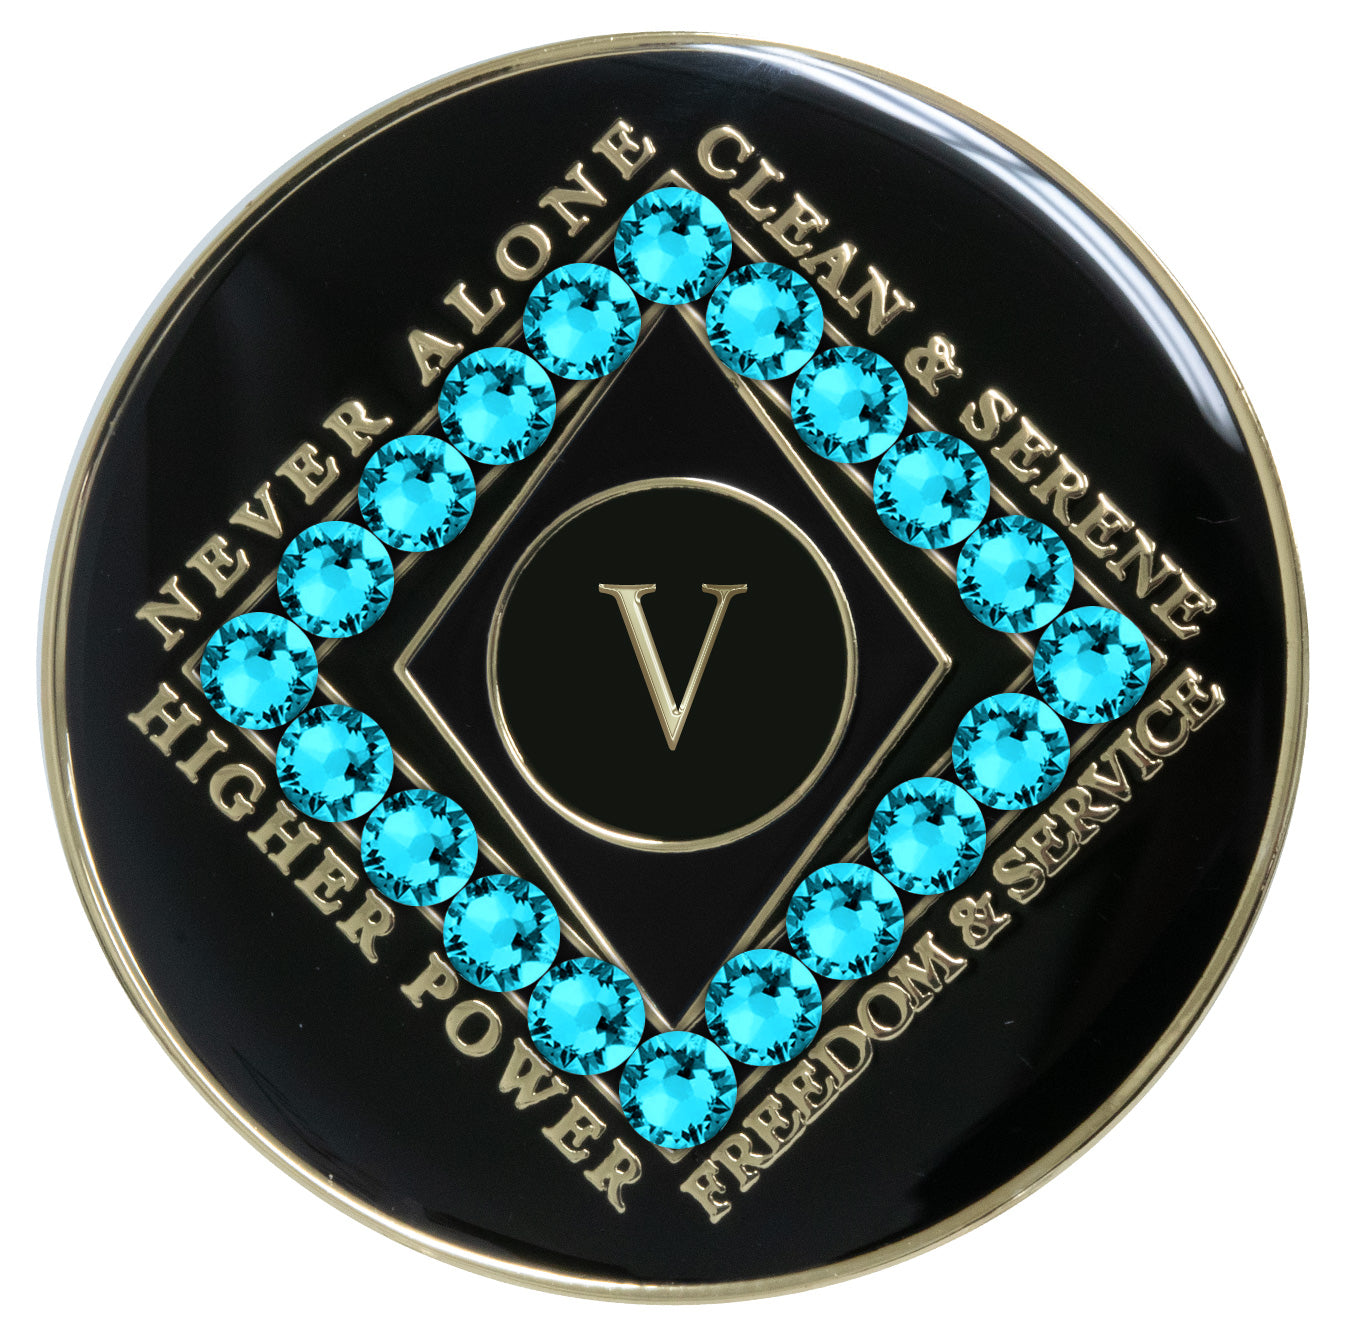 Clean Time Recovery Medallion with Aqua Zircon Crystals